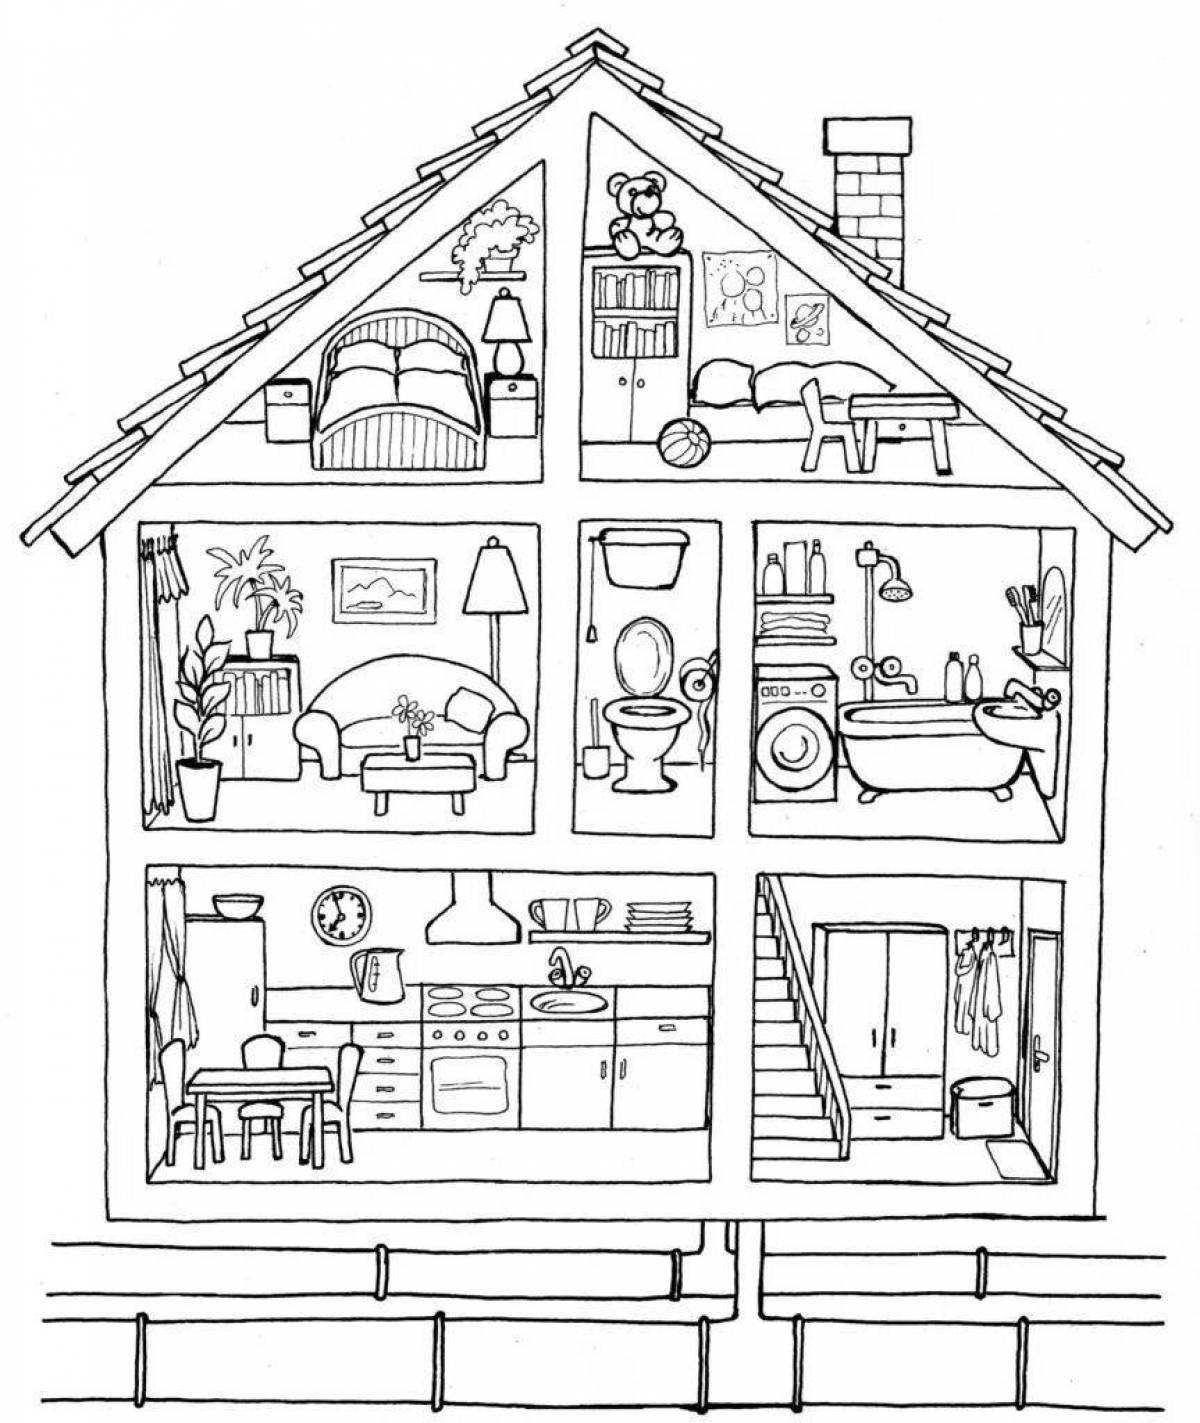 Coloring page festive furniture house ami